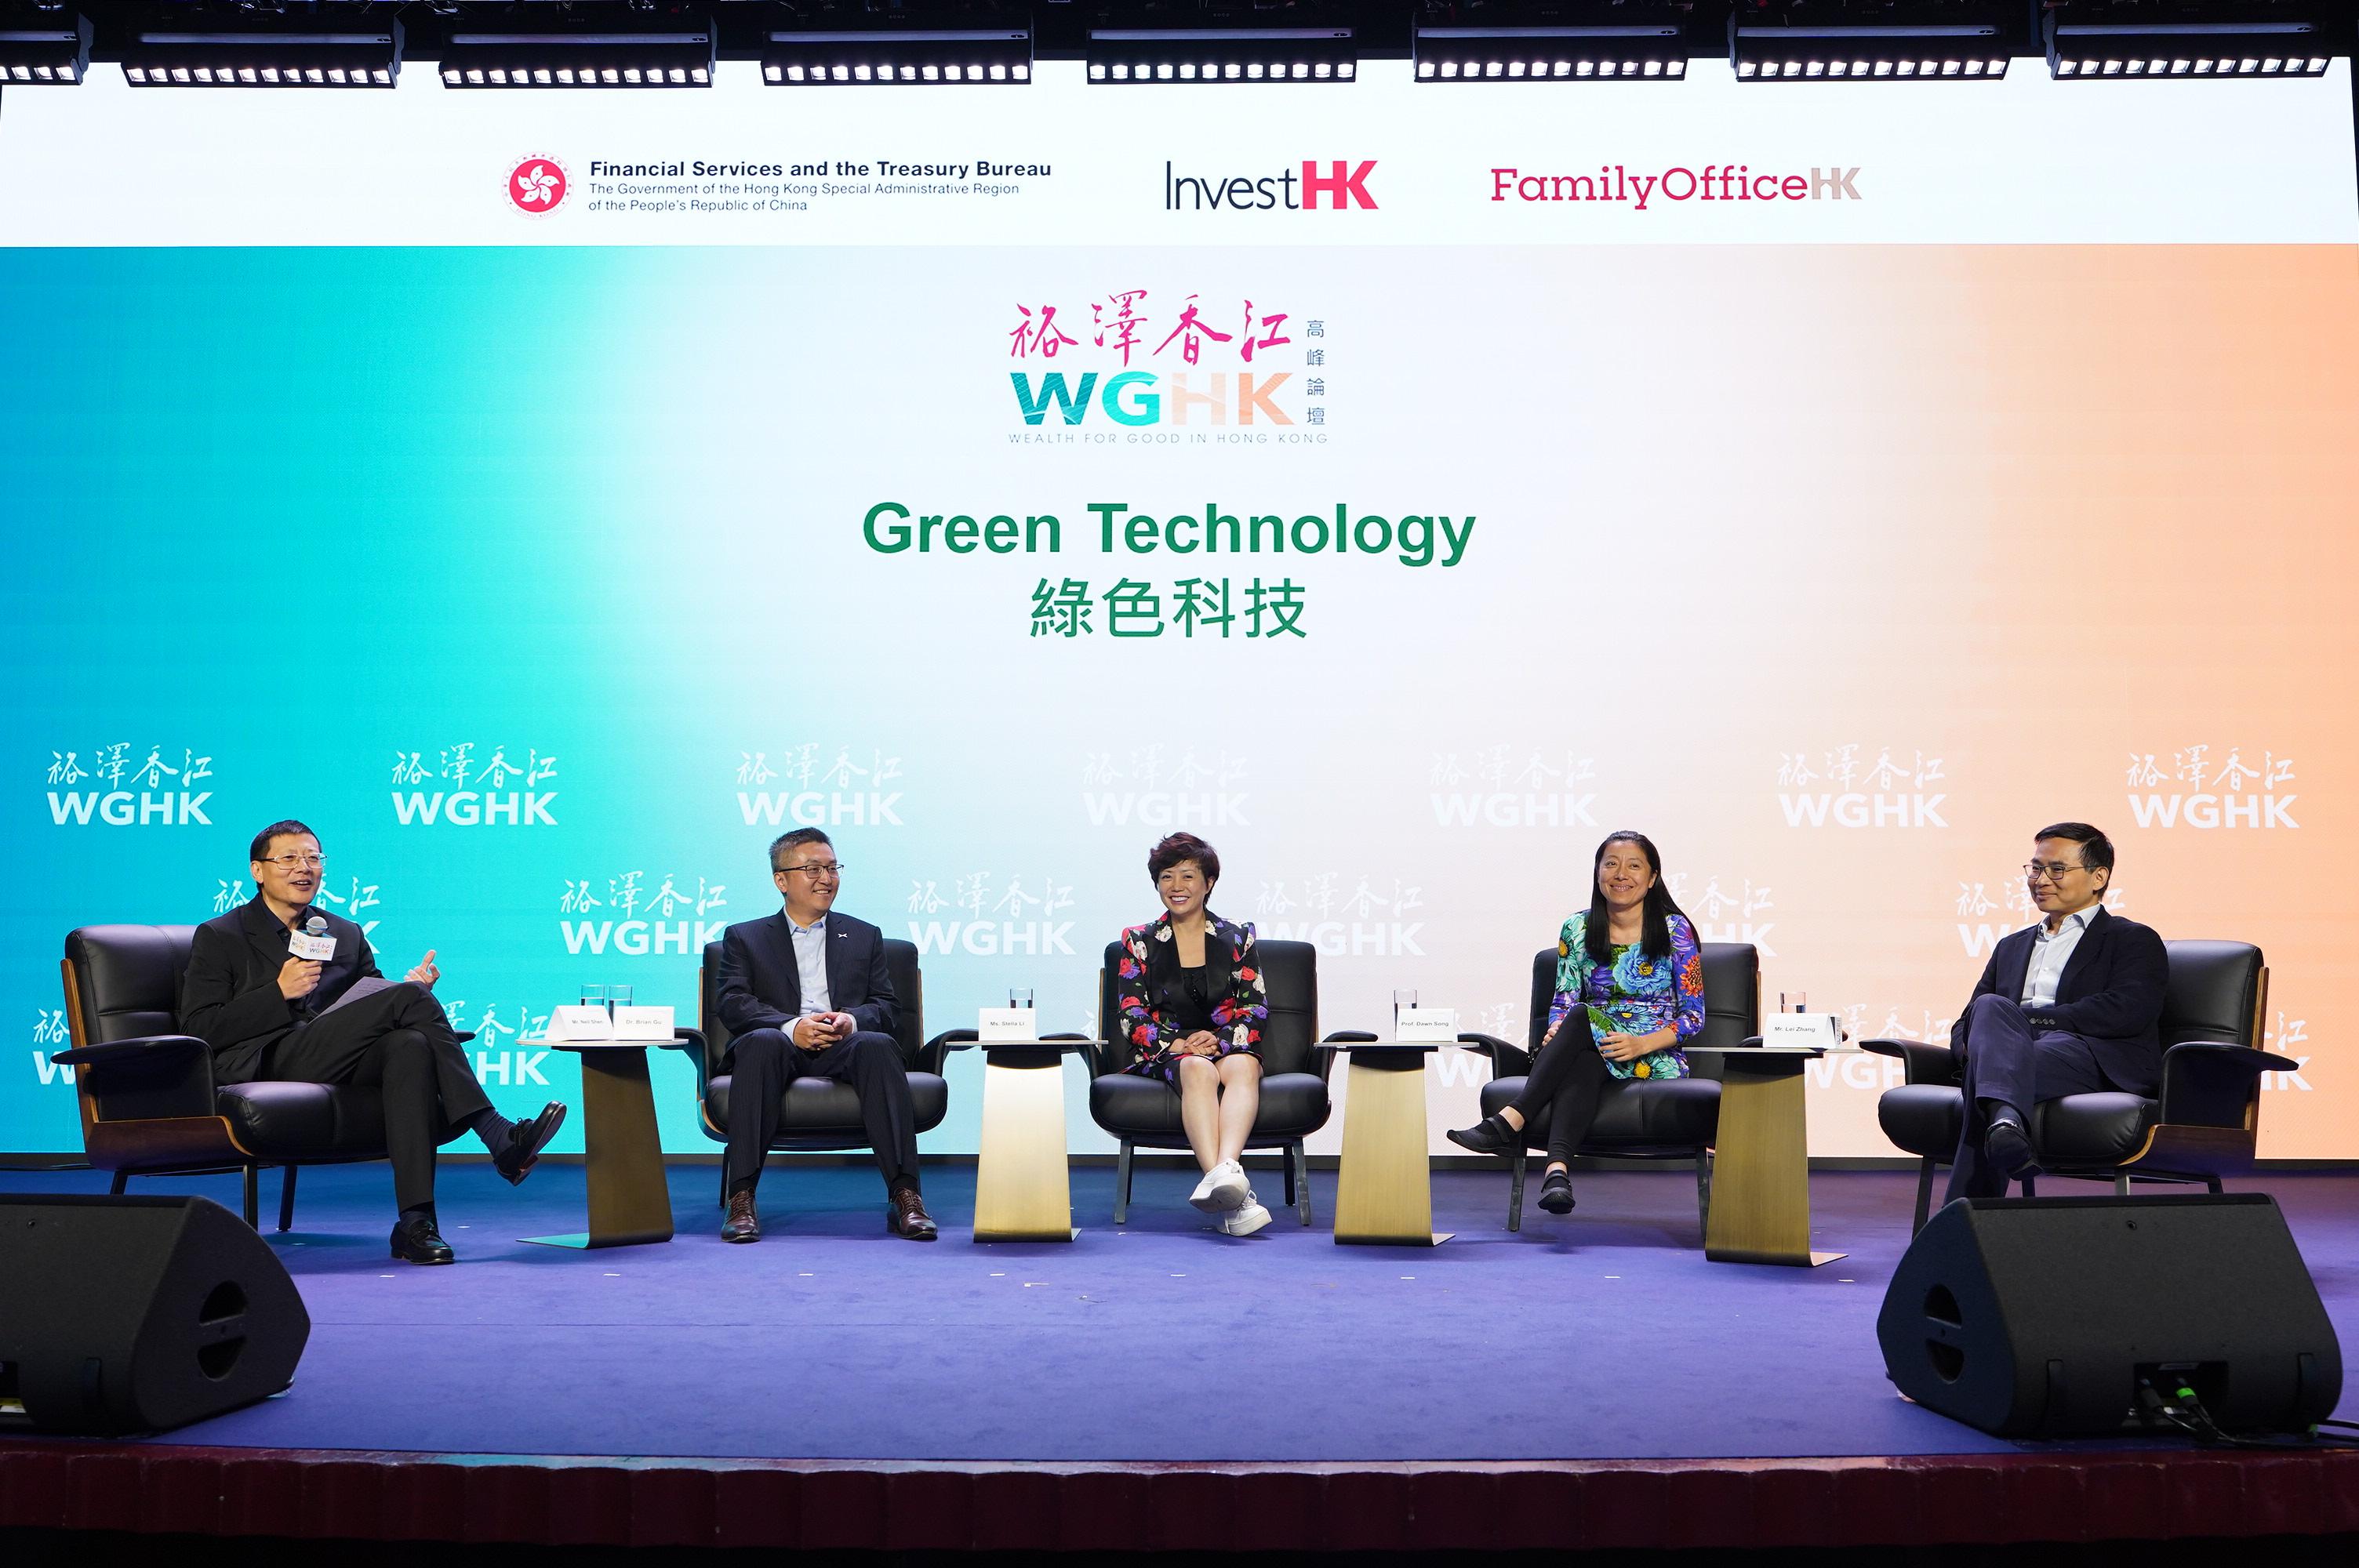 Pictured are moderator and panel speakers who shared in the Green Technology panel discussion at the Wealth for Good in Hong Kong Summit today (March 27) (from left): Founding and Managing Partner of HongShan, Mr Neil Shen; Vice Chairman and President of XPENG, Dr Brian Gu; Executive Vice President of BYD Company Limited and CEO of BYD Americas, Ms Stella Li; Professor of Department of Electrical Engineering and Computer Science of UC Berkeley, Prof Dawn Song; and CEO of Envision Group, Mr Lei Zhang.